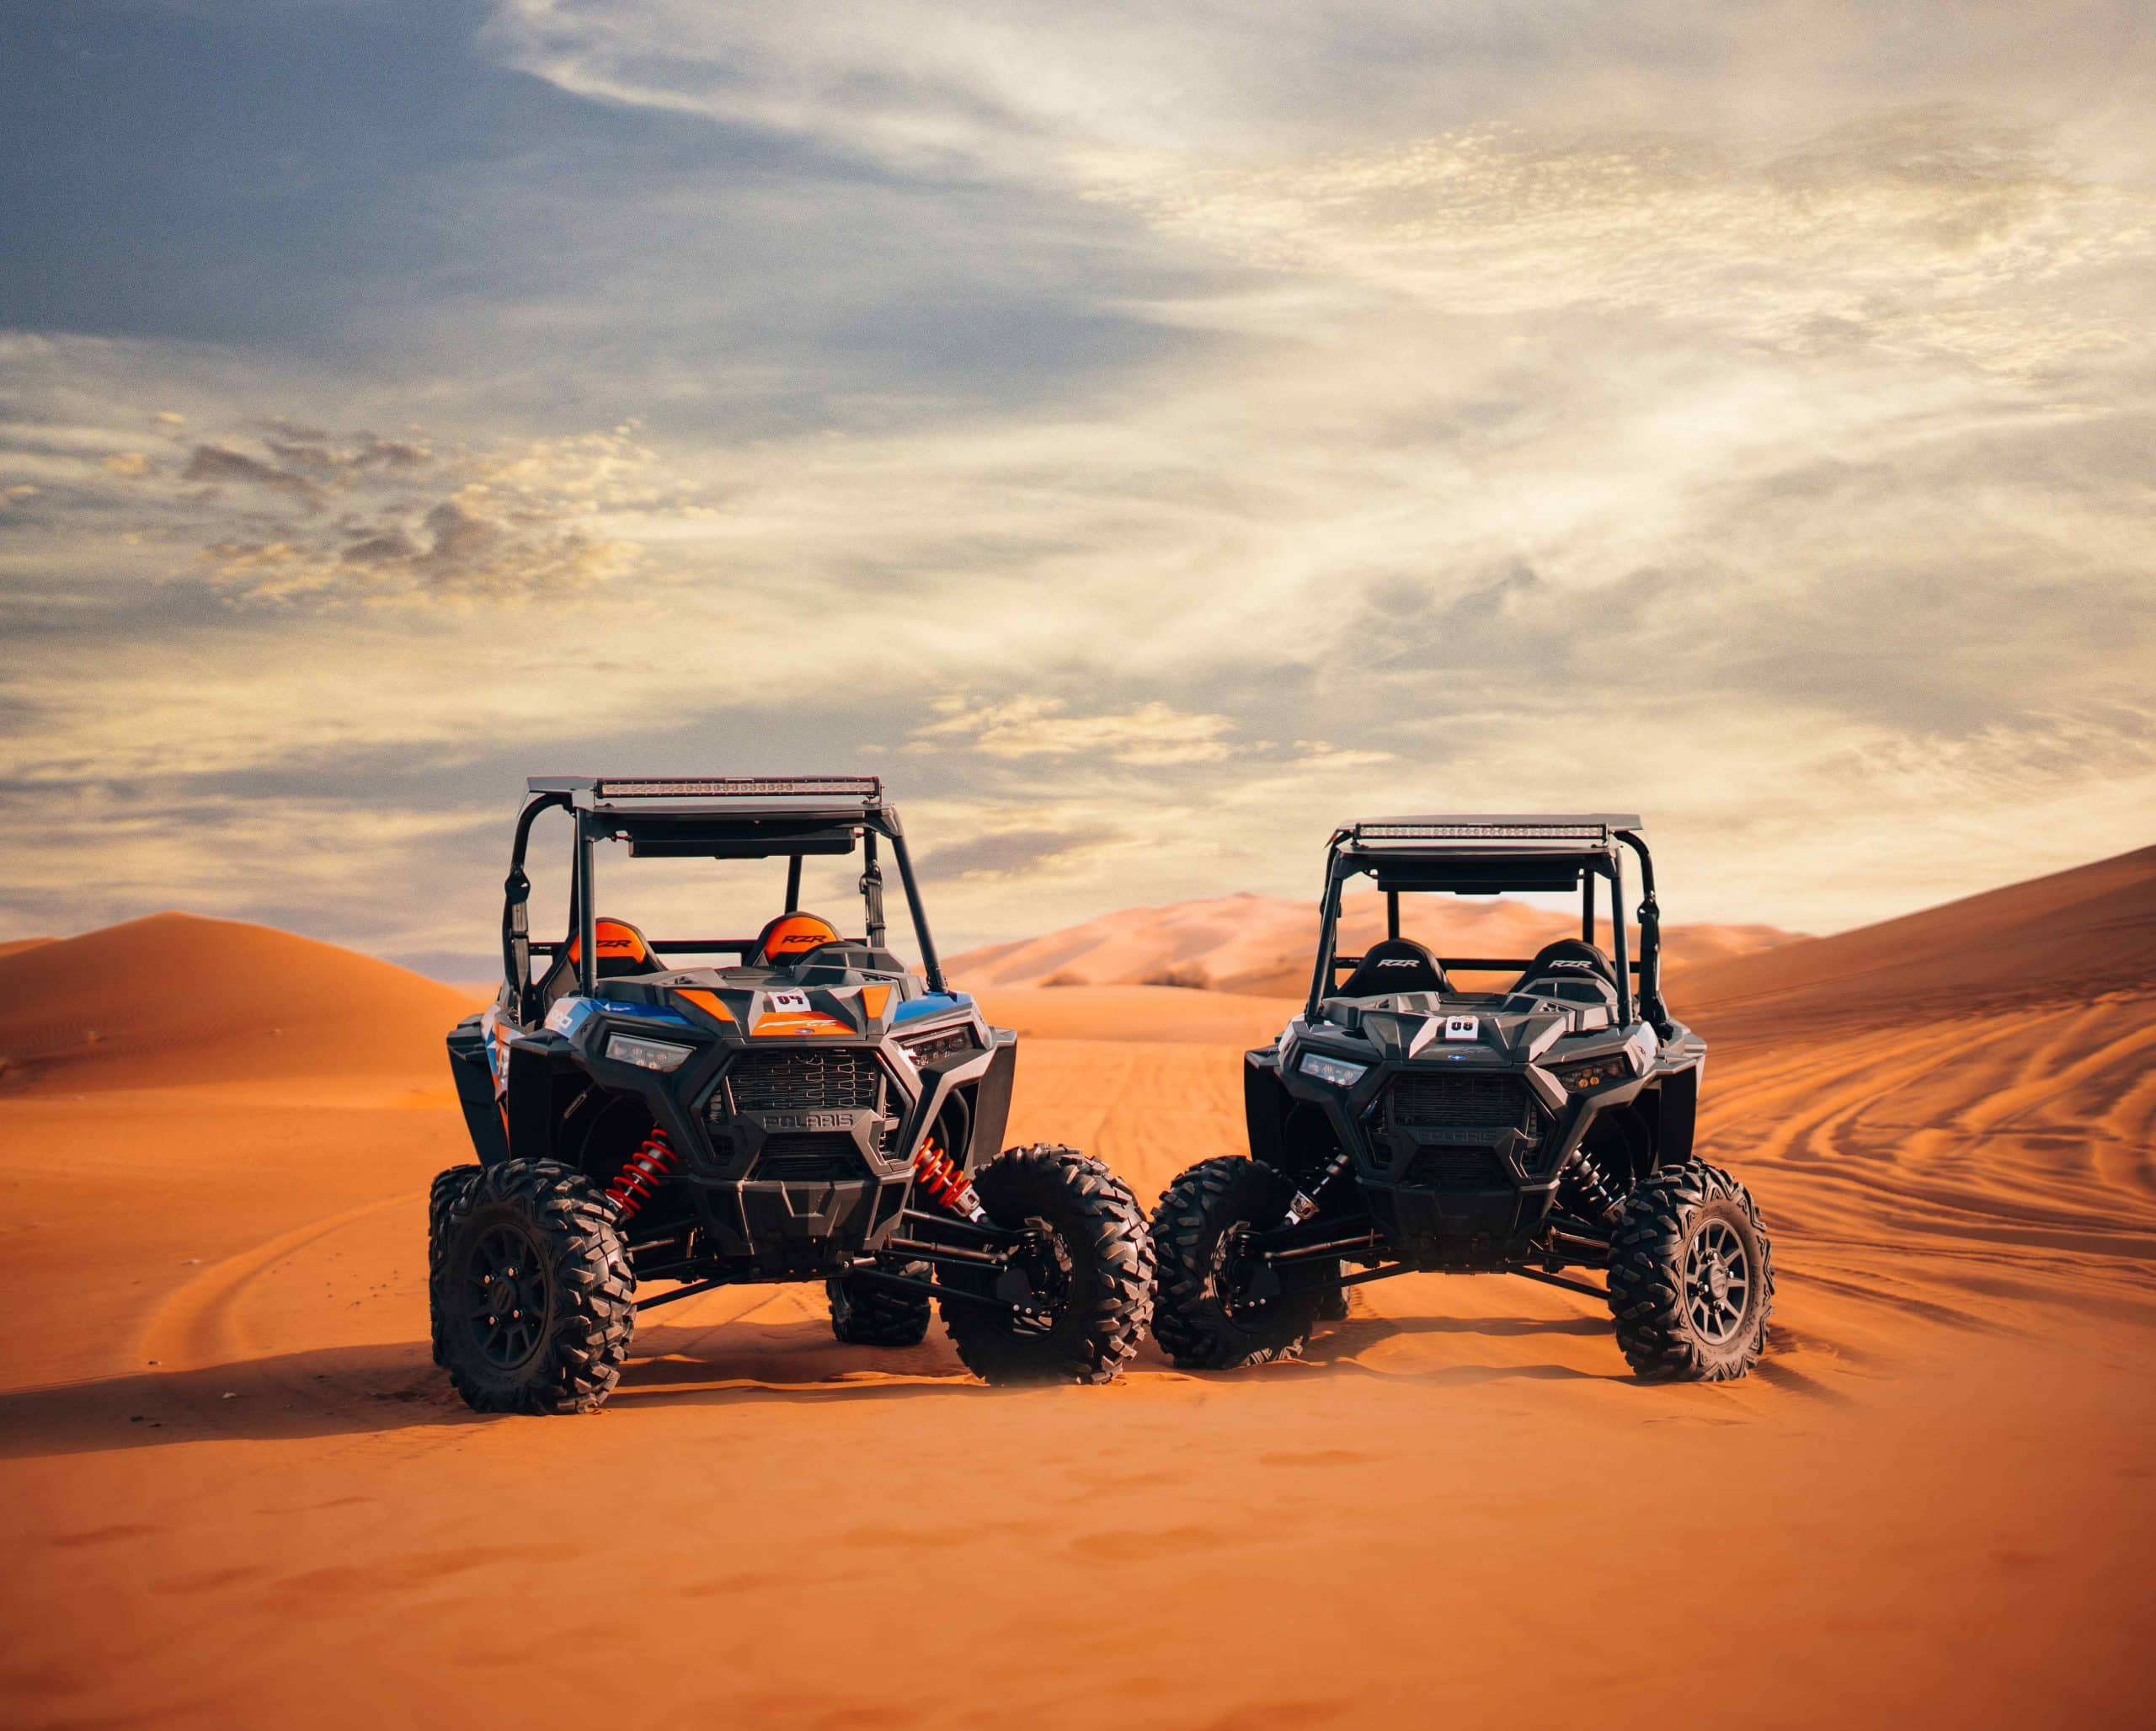 Things To Know Before Going On A Quad Biking Adventure